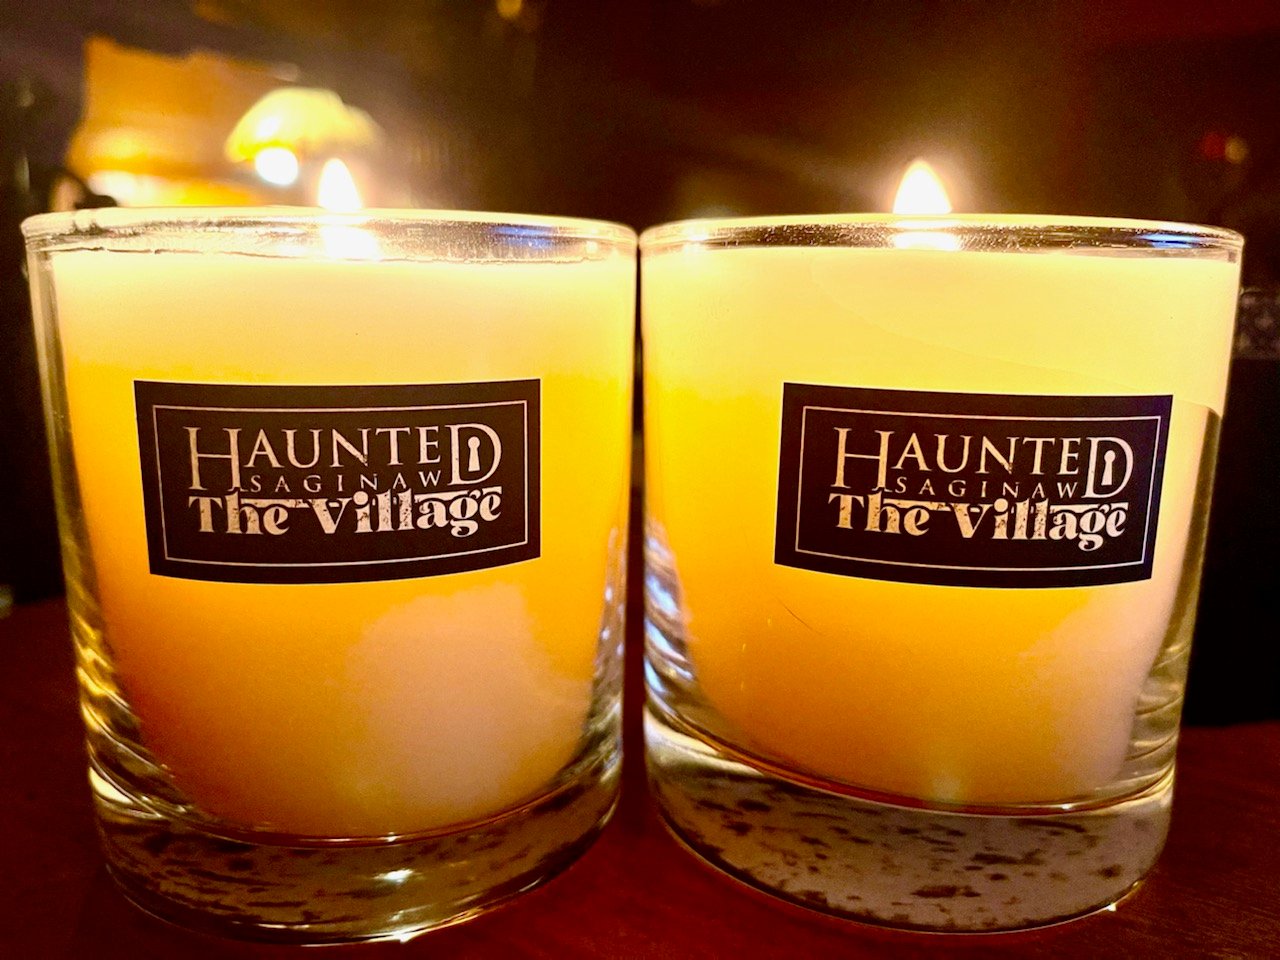 Haunted Saginaw the Village 2 candle combo